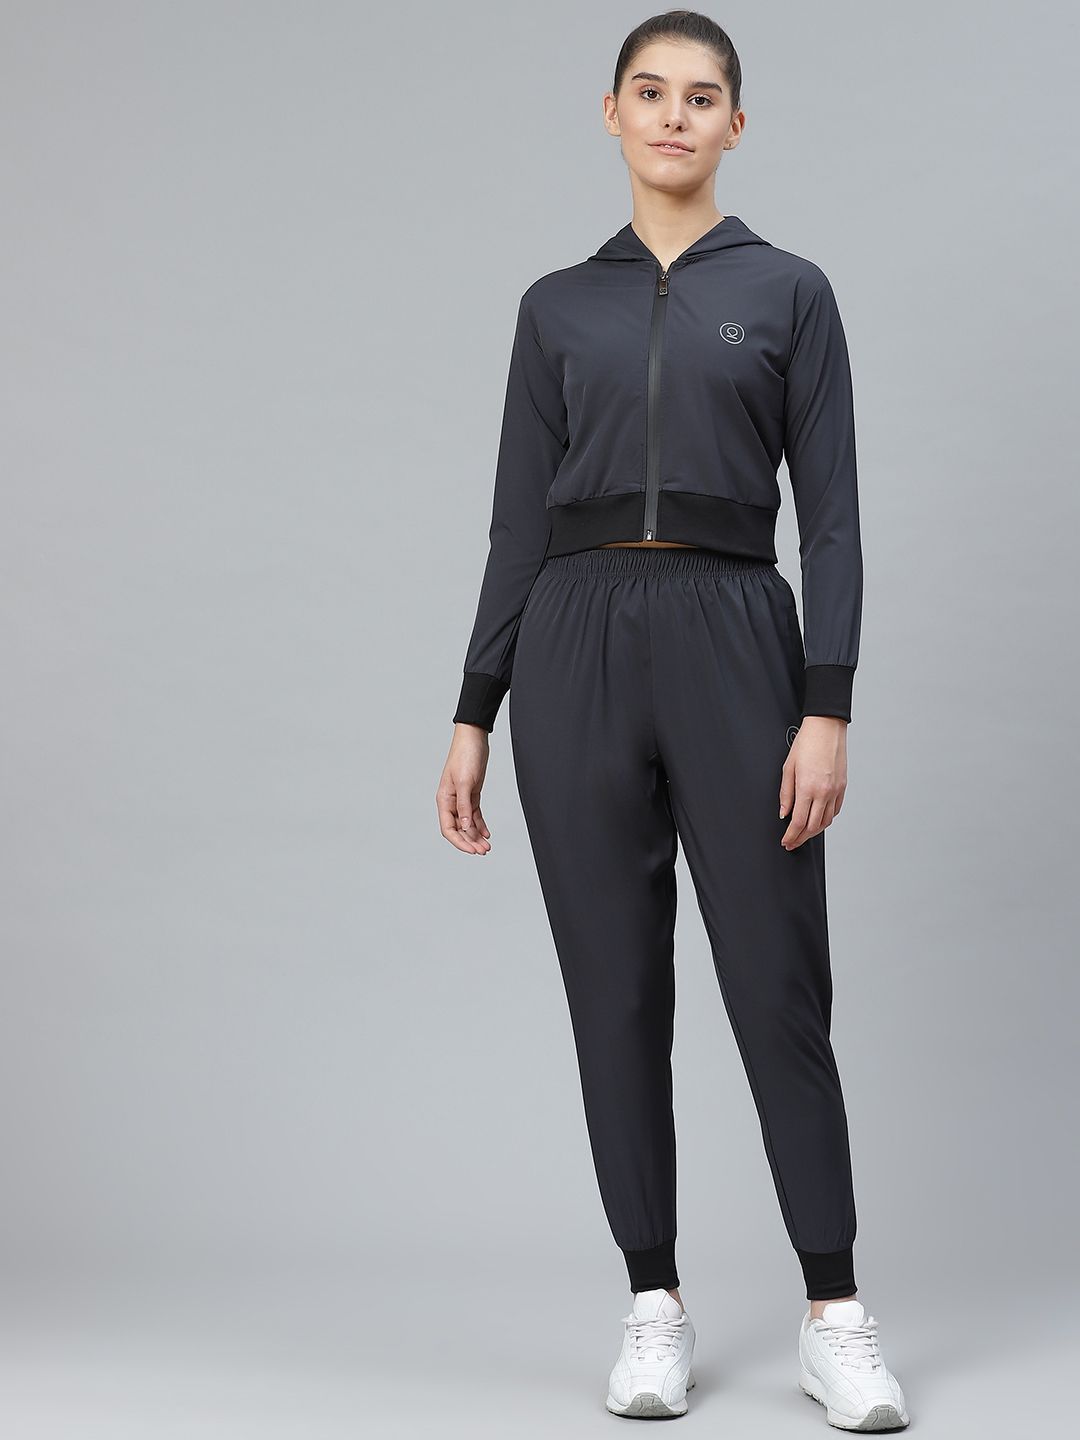 Chkokko Women Charcoal Grey Solid Training Tracksuit Price in India